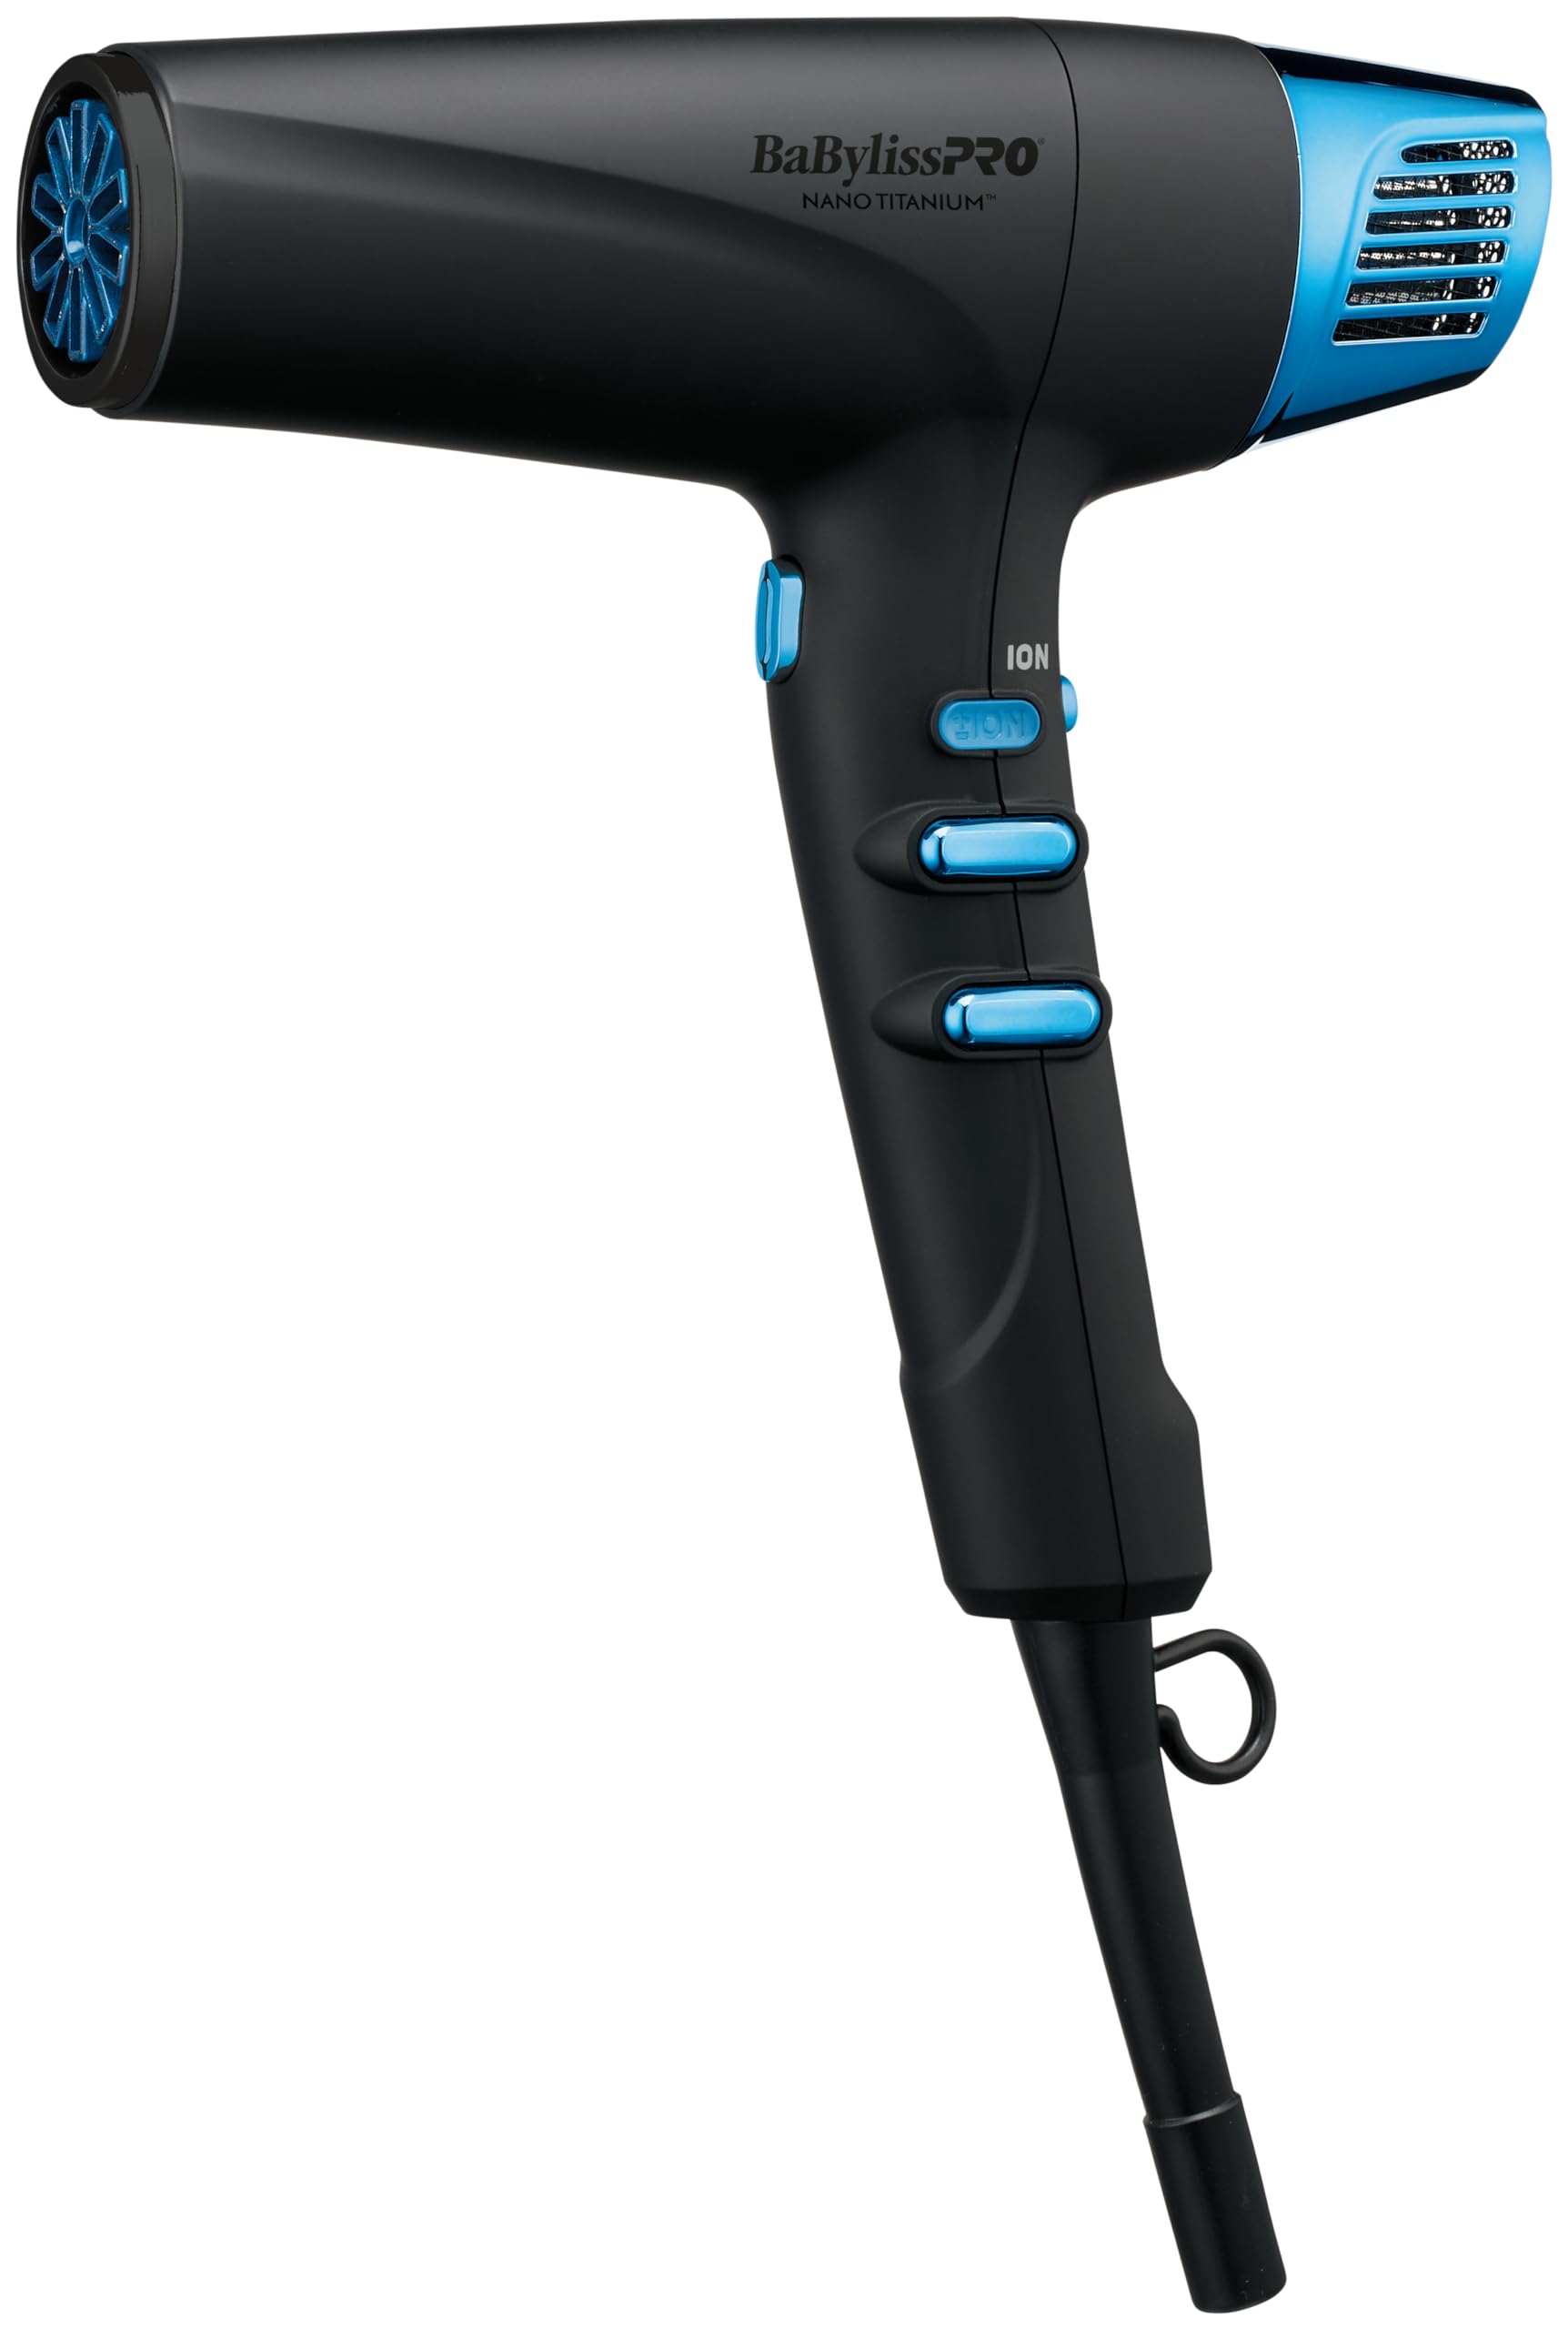 CONAIR BNTMB9100 BLACK AND BLUE DRYER LIMITED EDITION